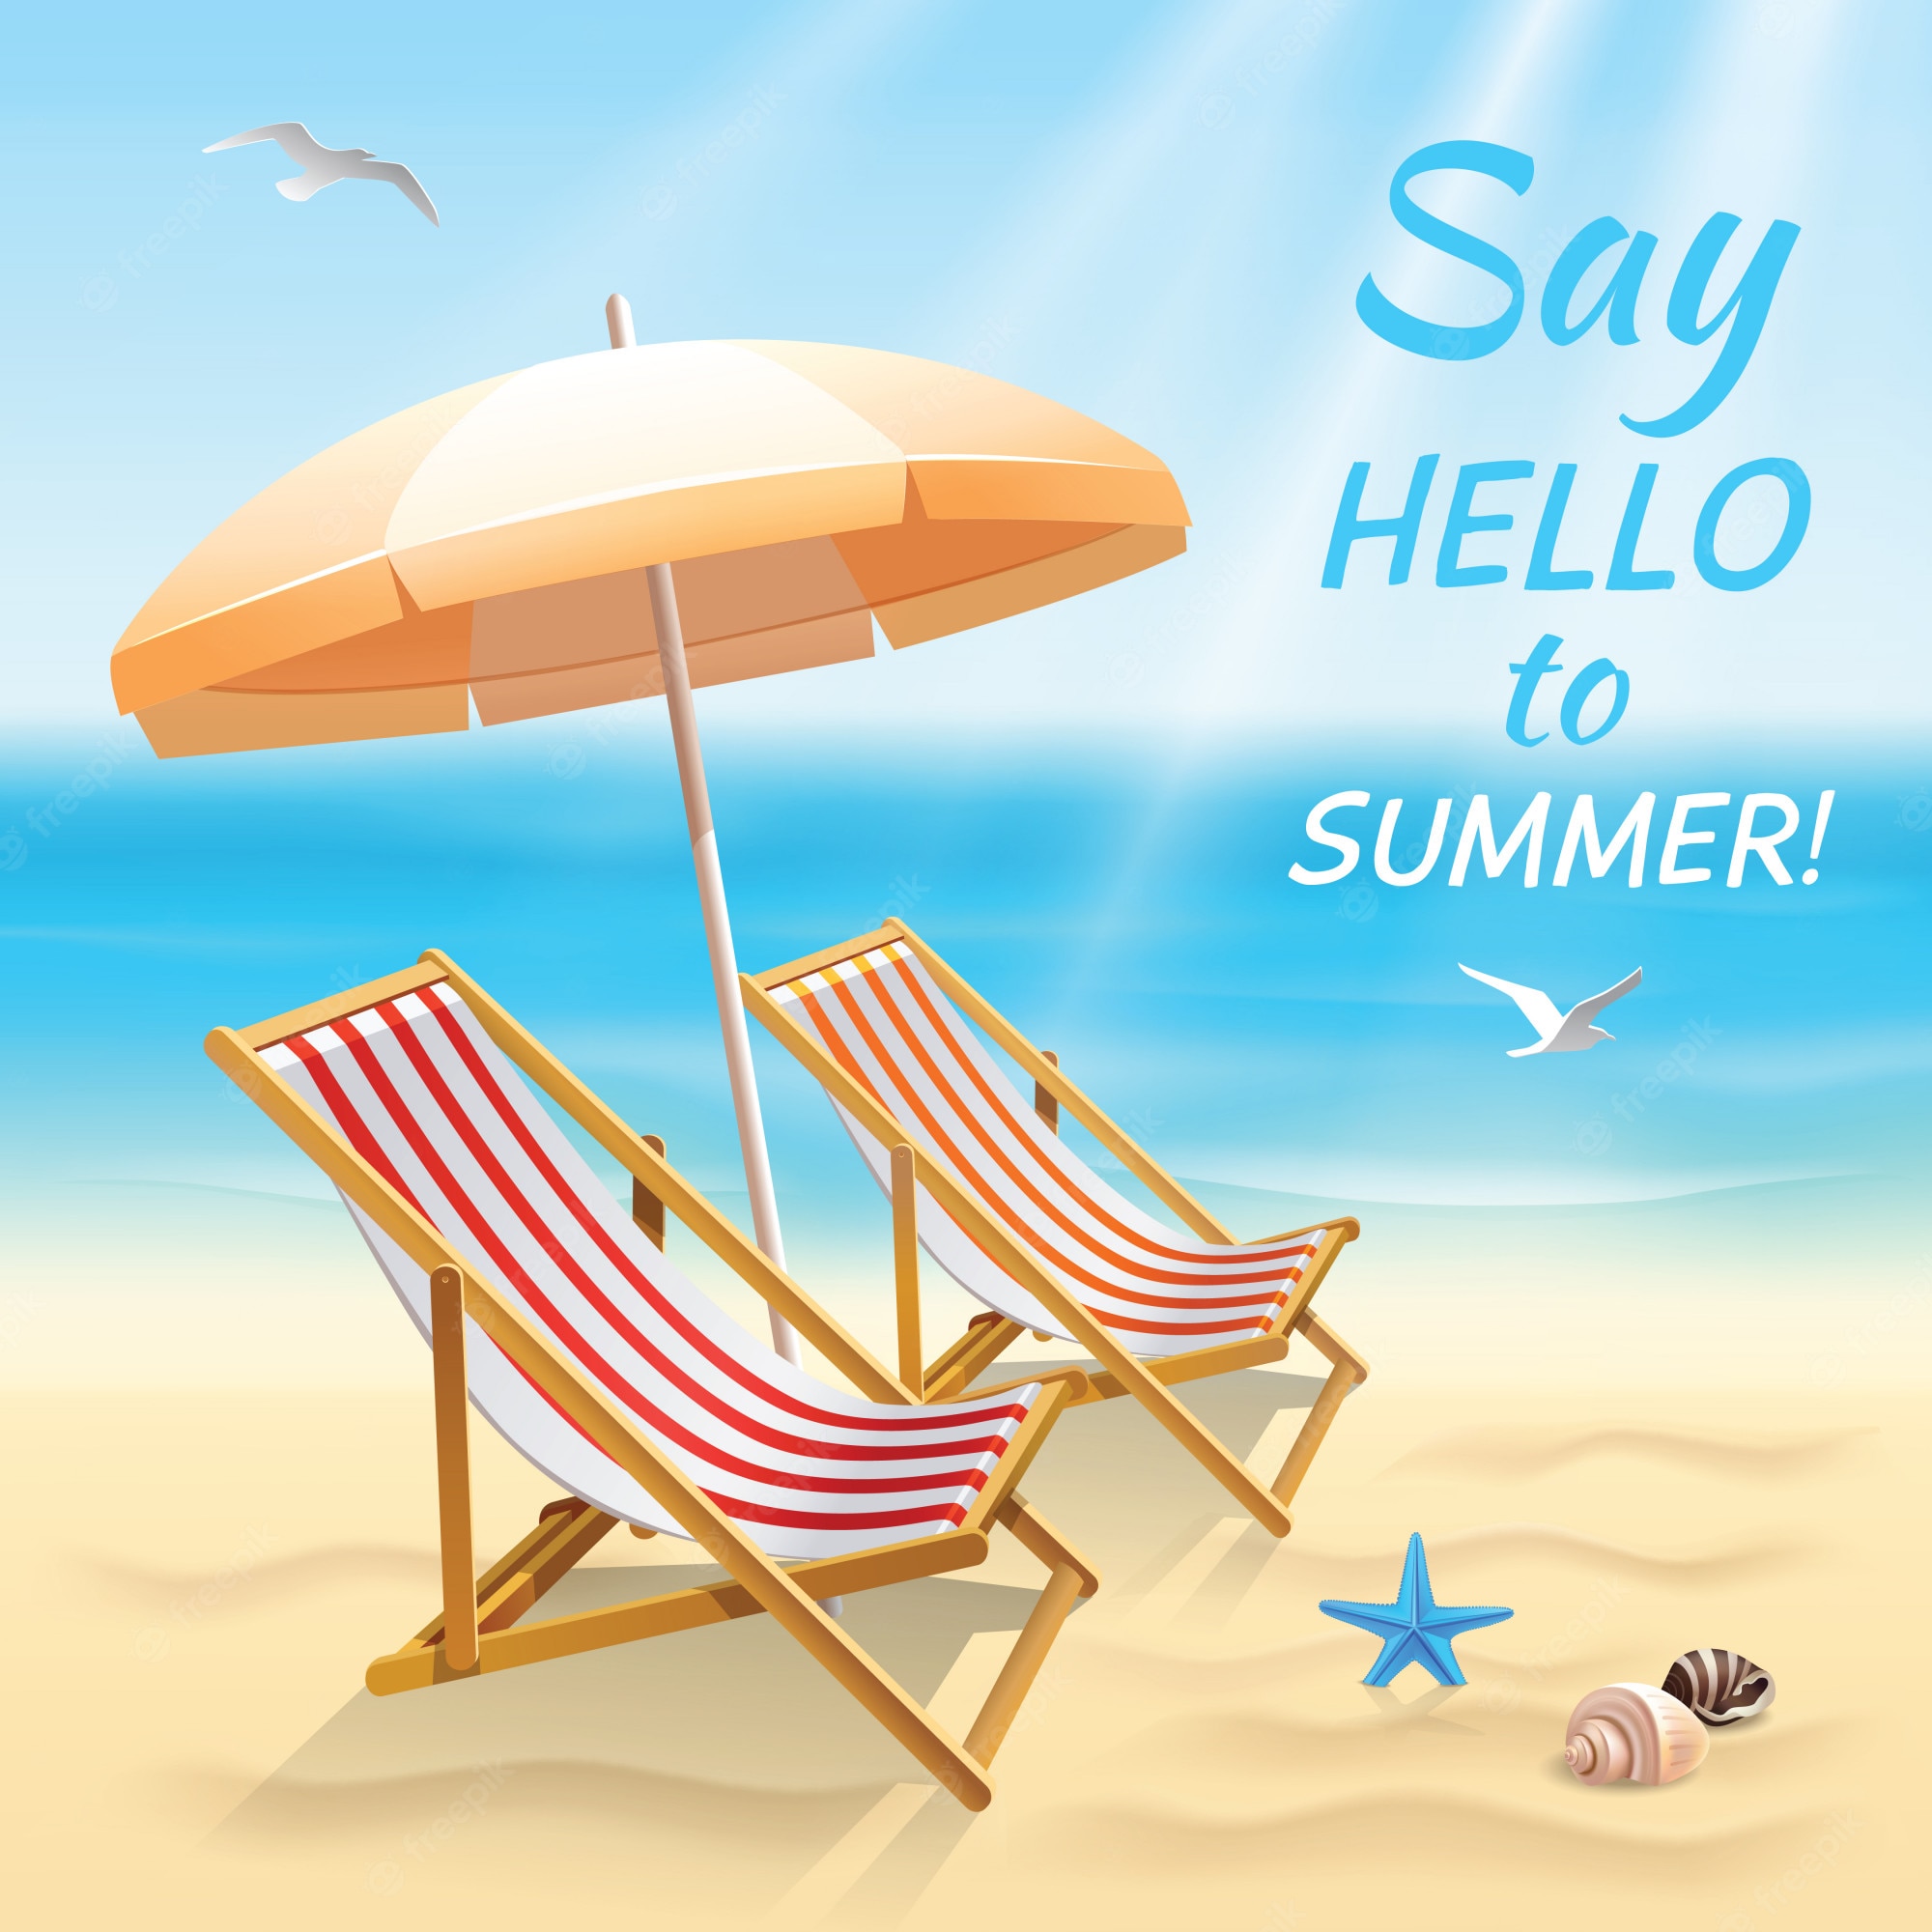 Free Vector. Summer holidays beach background say hello to summer wallpaper with sun chair and shade vector illustration